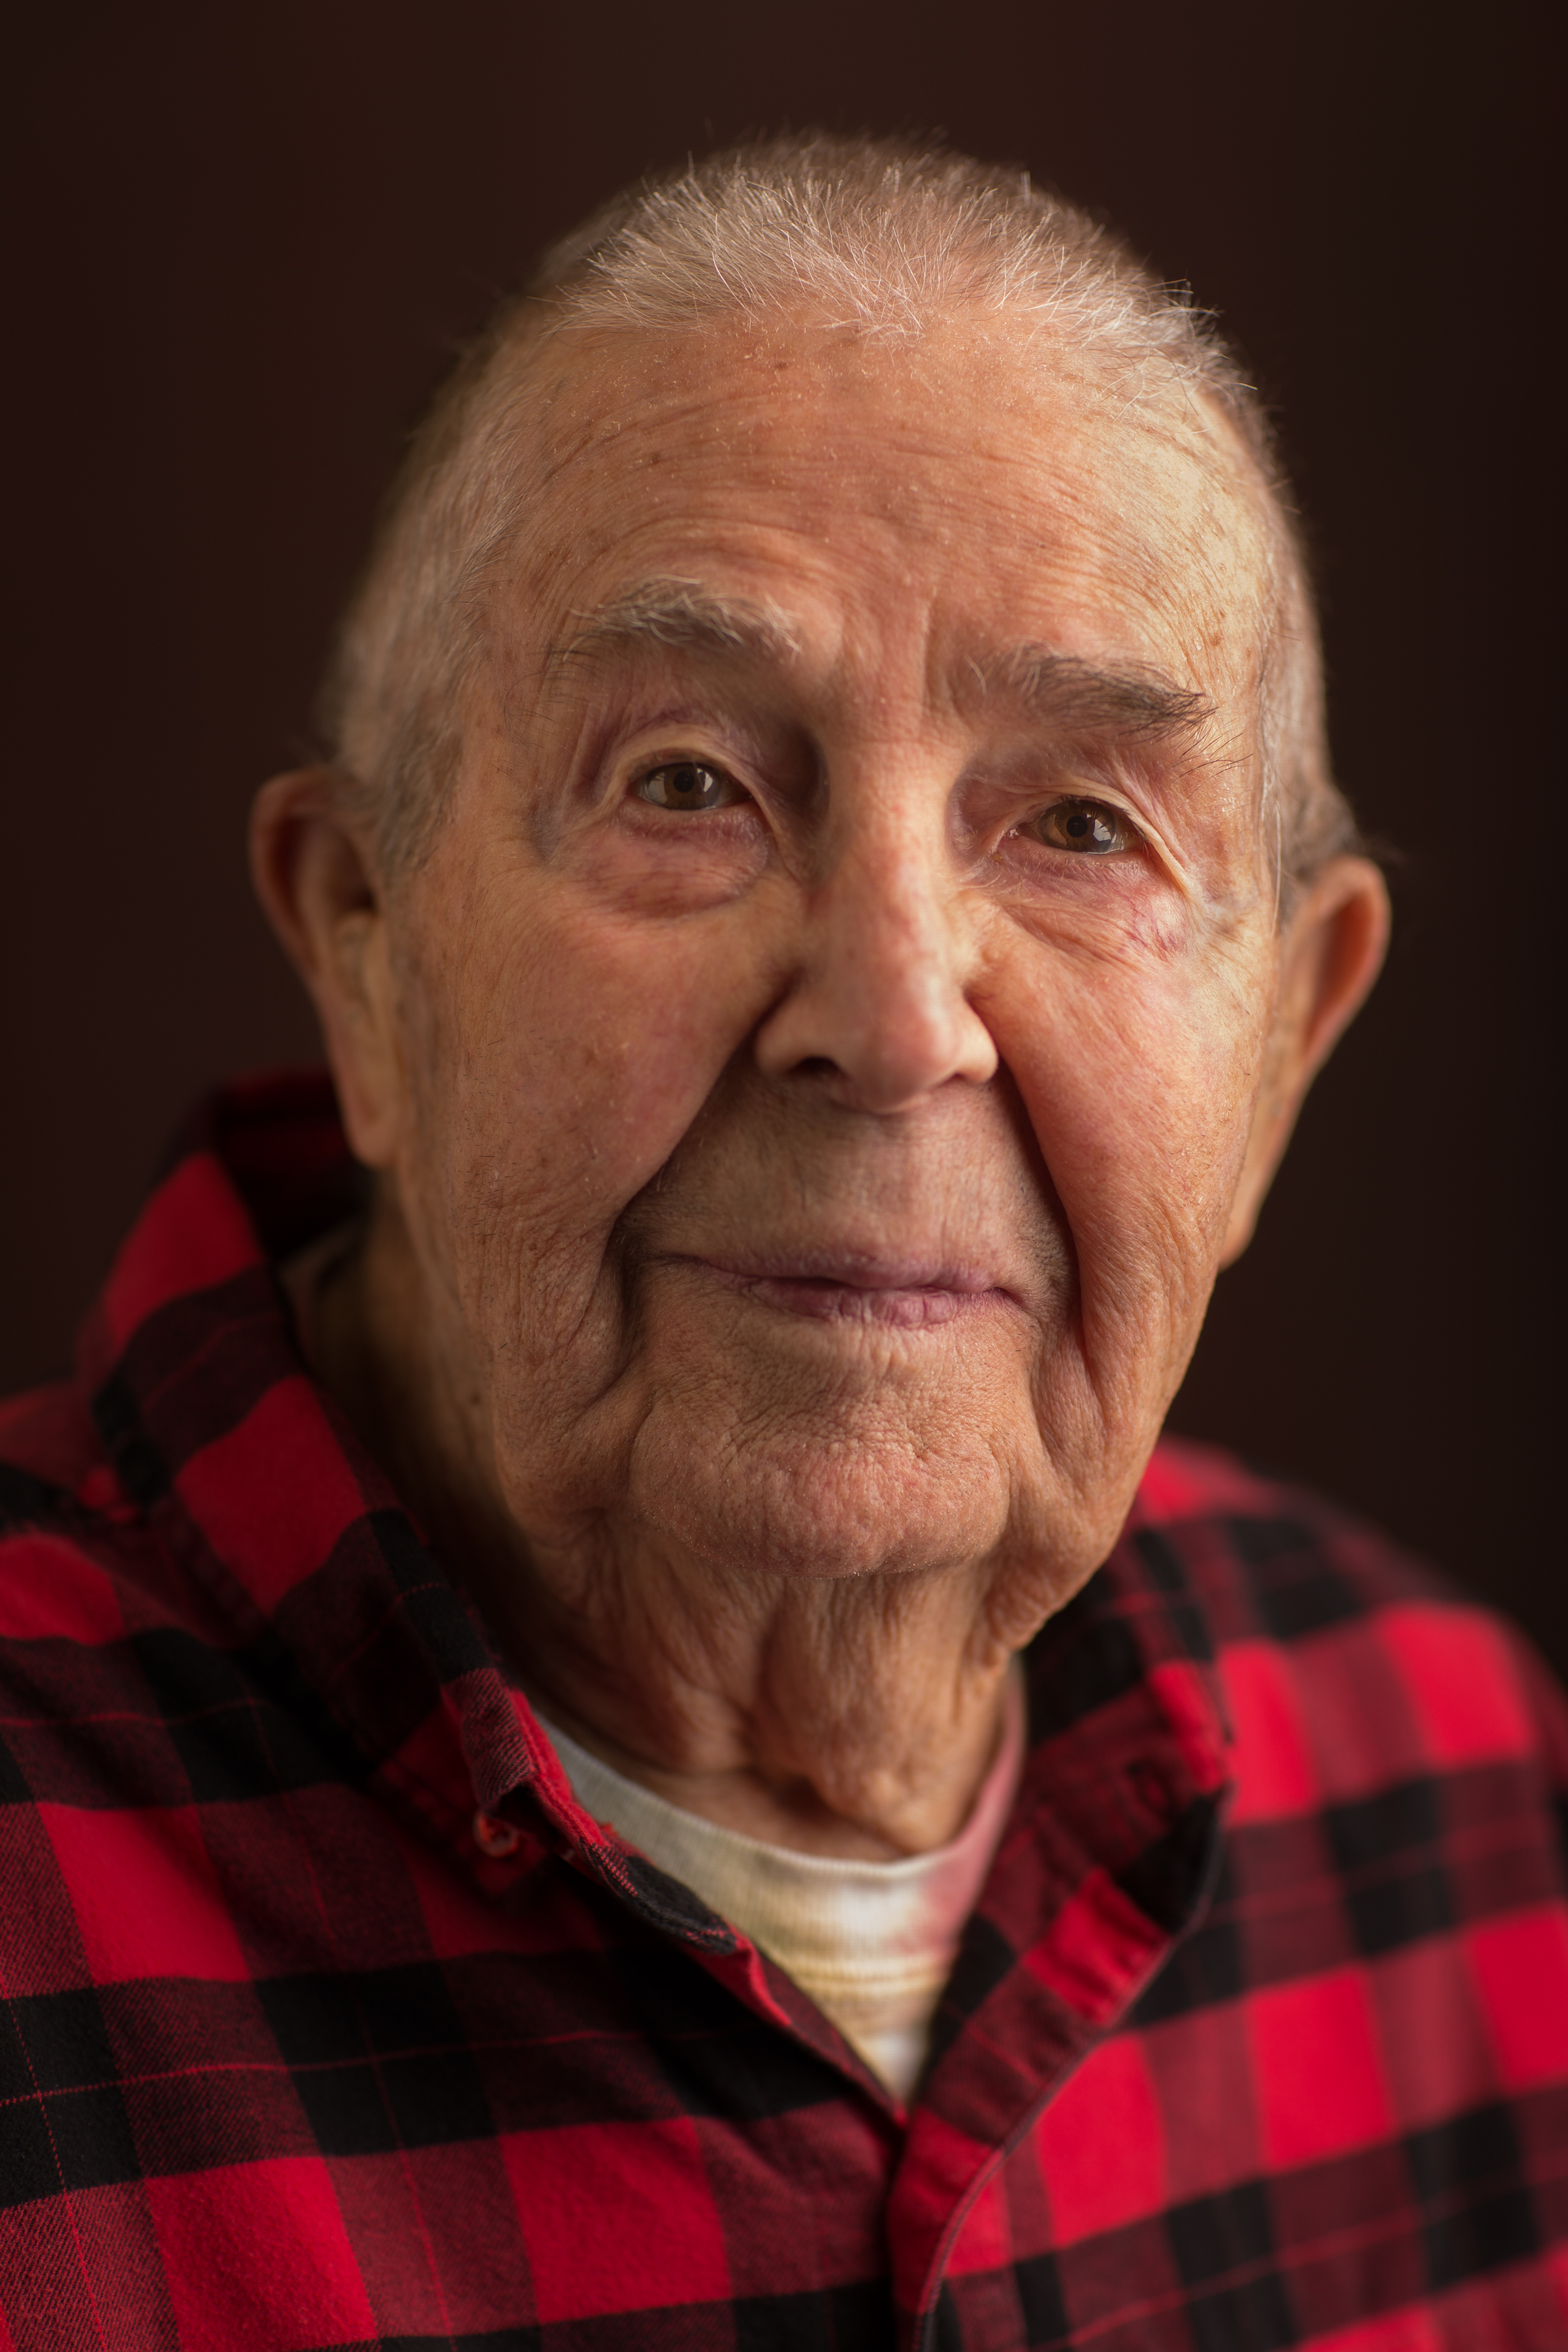  Ed Hendrickson, 98, of Brewer, Maine, still plans to do some downhill skiing once the snow starts to fly; in 2003 Hendrickson was the recipient of Sugarloaf’s Paul Schipper’s Iron Man Award. While he's been an avid skier most of his life and the dea